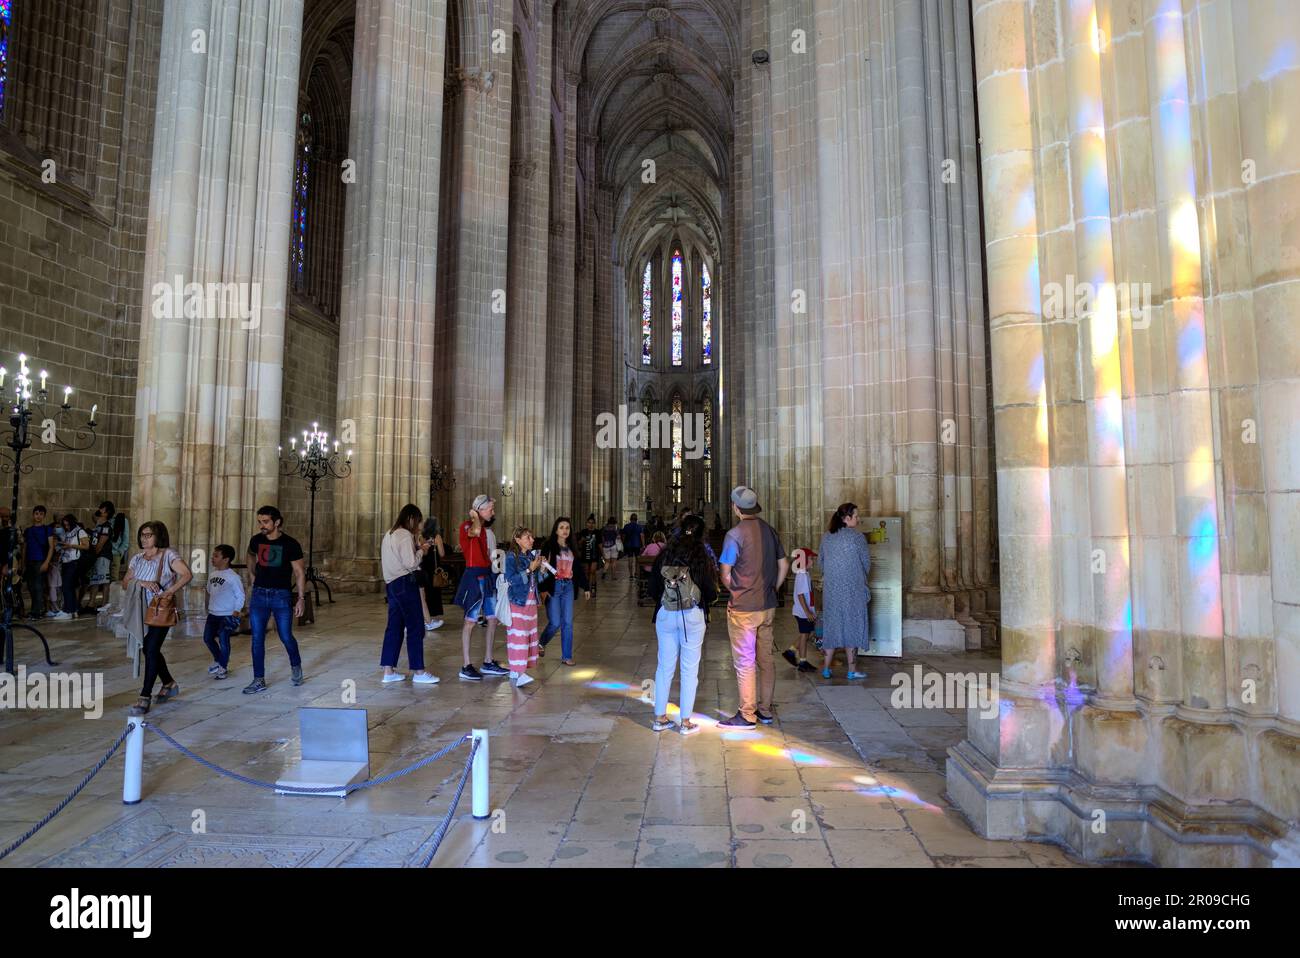 Batalha, Portugal - August 15, 2022: Interior of gothic Monastery showing altar with cross, stained-glass windows, pews and numerous tourists Stock Photo